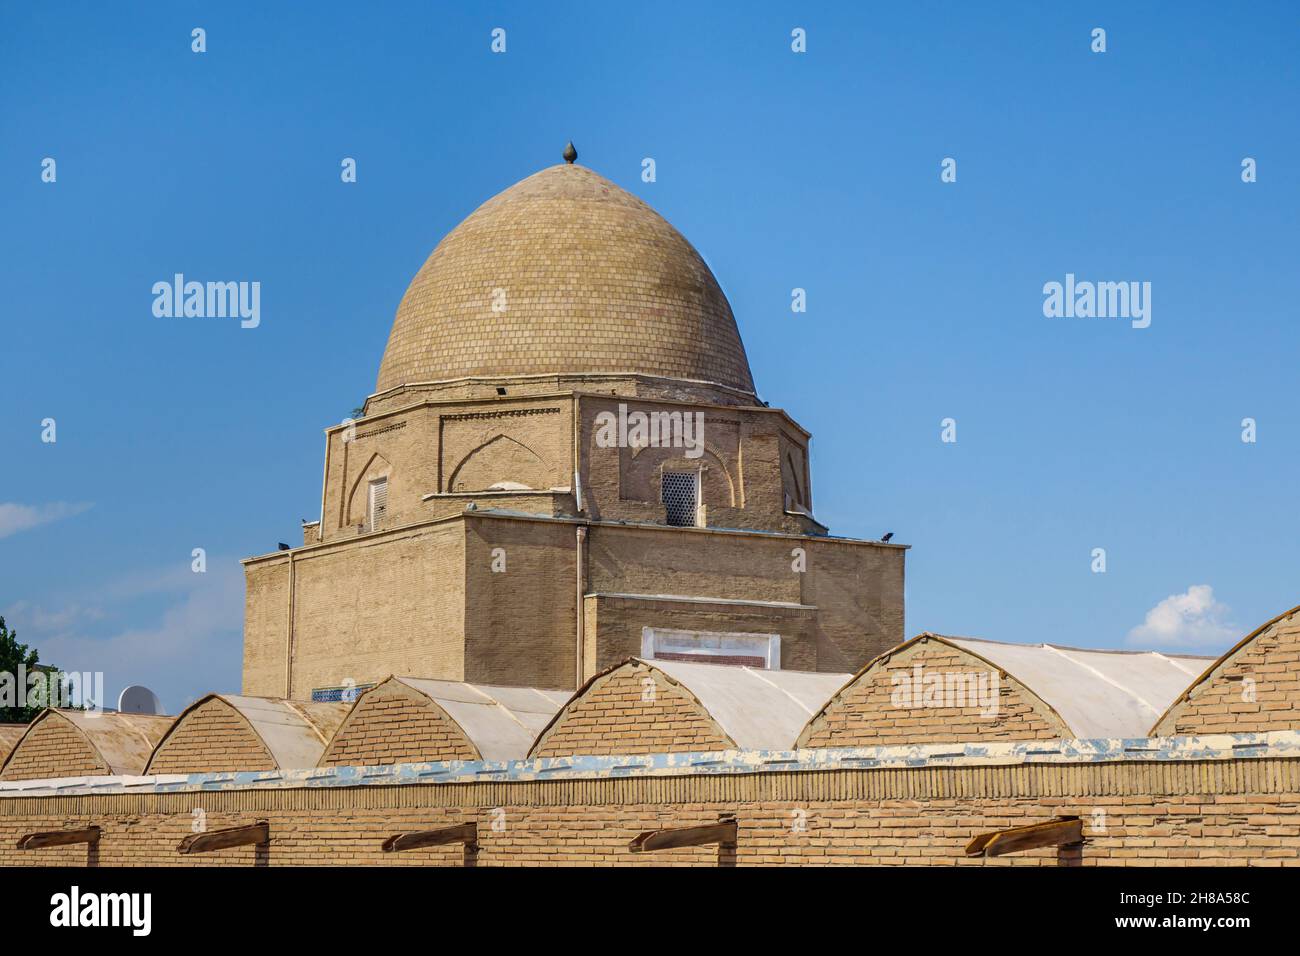 View of the Rukhabad mausoleum over the roofs of the cells of the madrasah of the same name. Shot in Samarkand, Uzbekistan Stock Photo